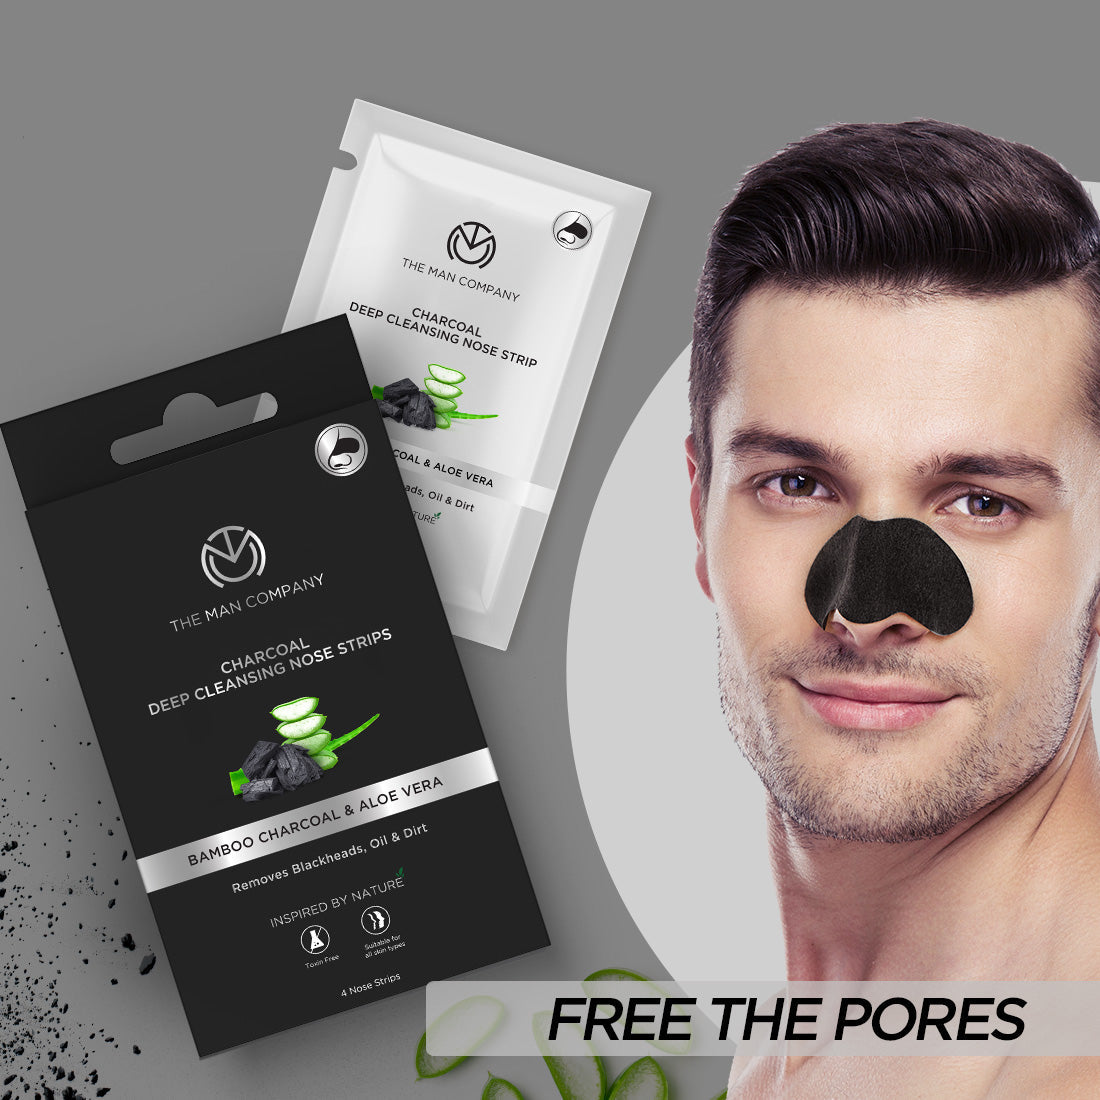 Deep Cleansing Nose Strip  Bamboo Charcoal  Aloe Vera